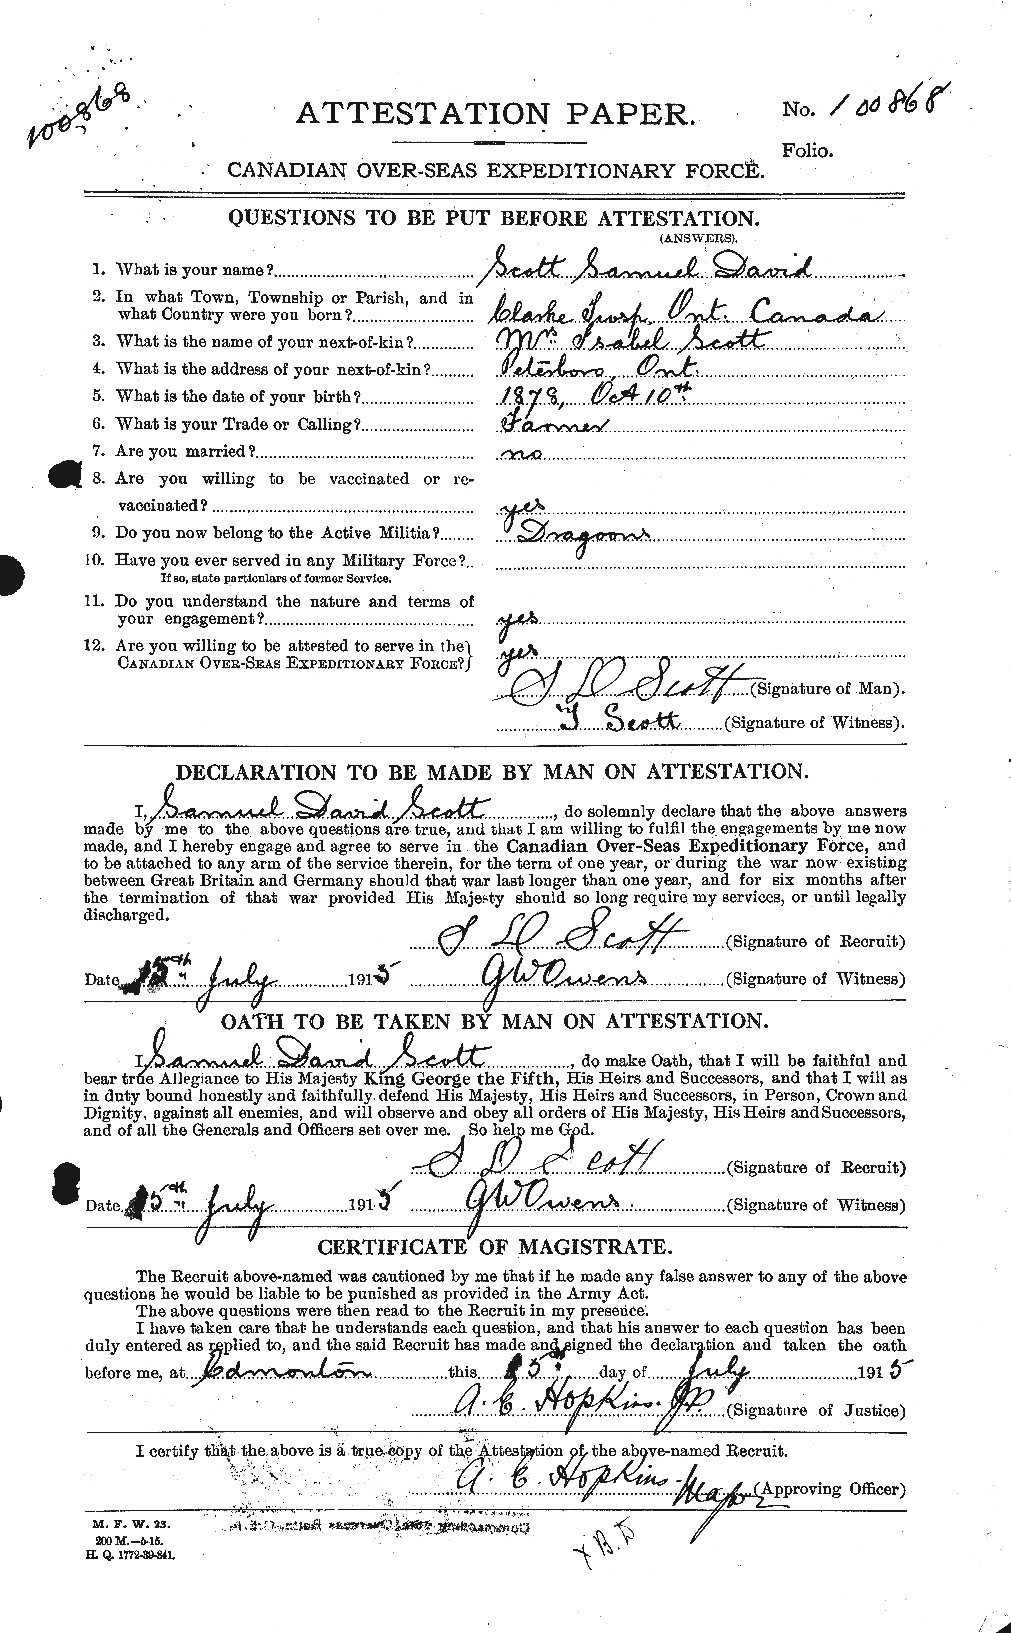 Personnel Records of the First World War - CEF 088861a